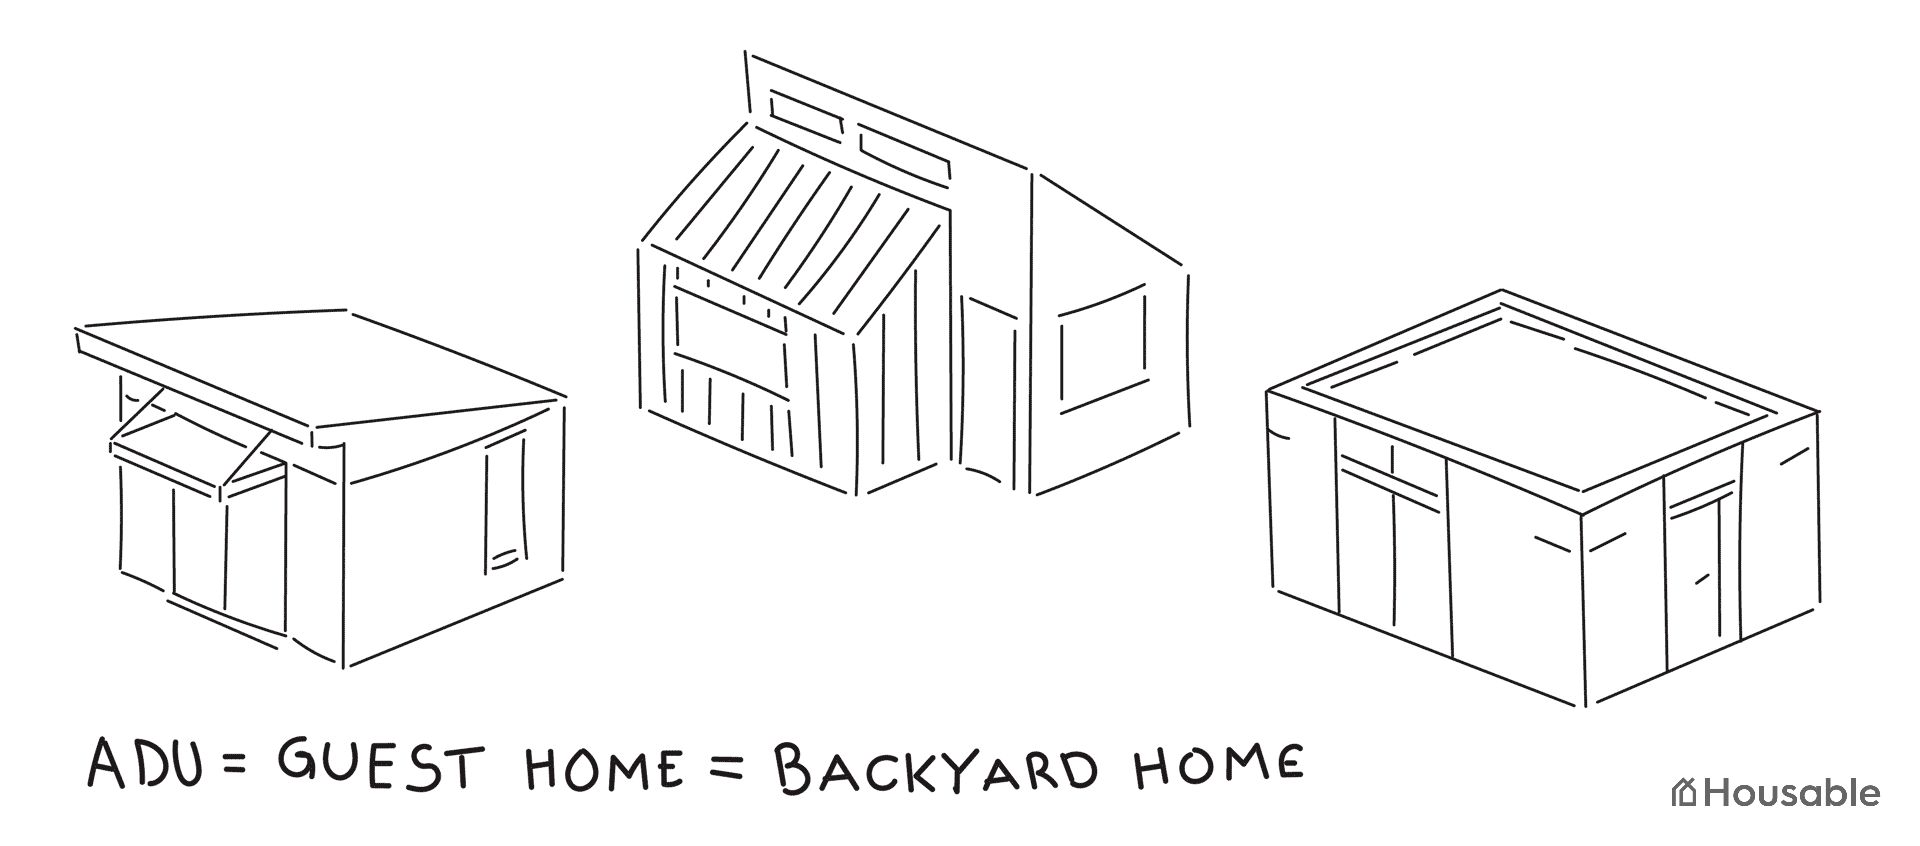 Accessory Dwelling Unit called guest homes or backyard homes.